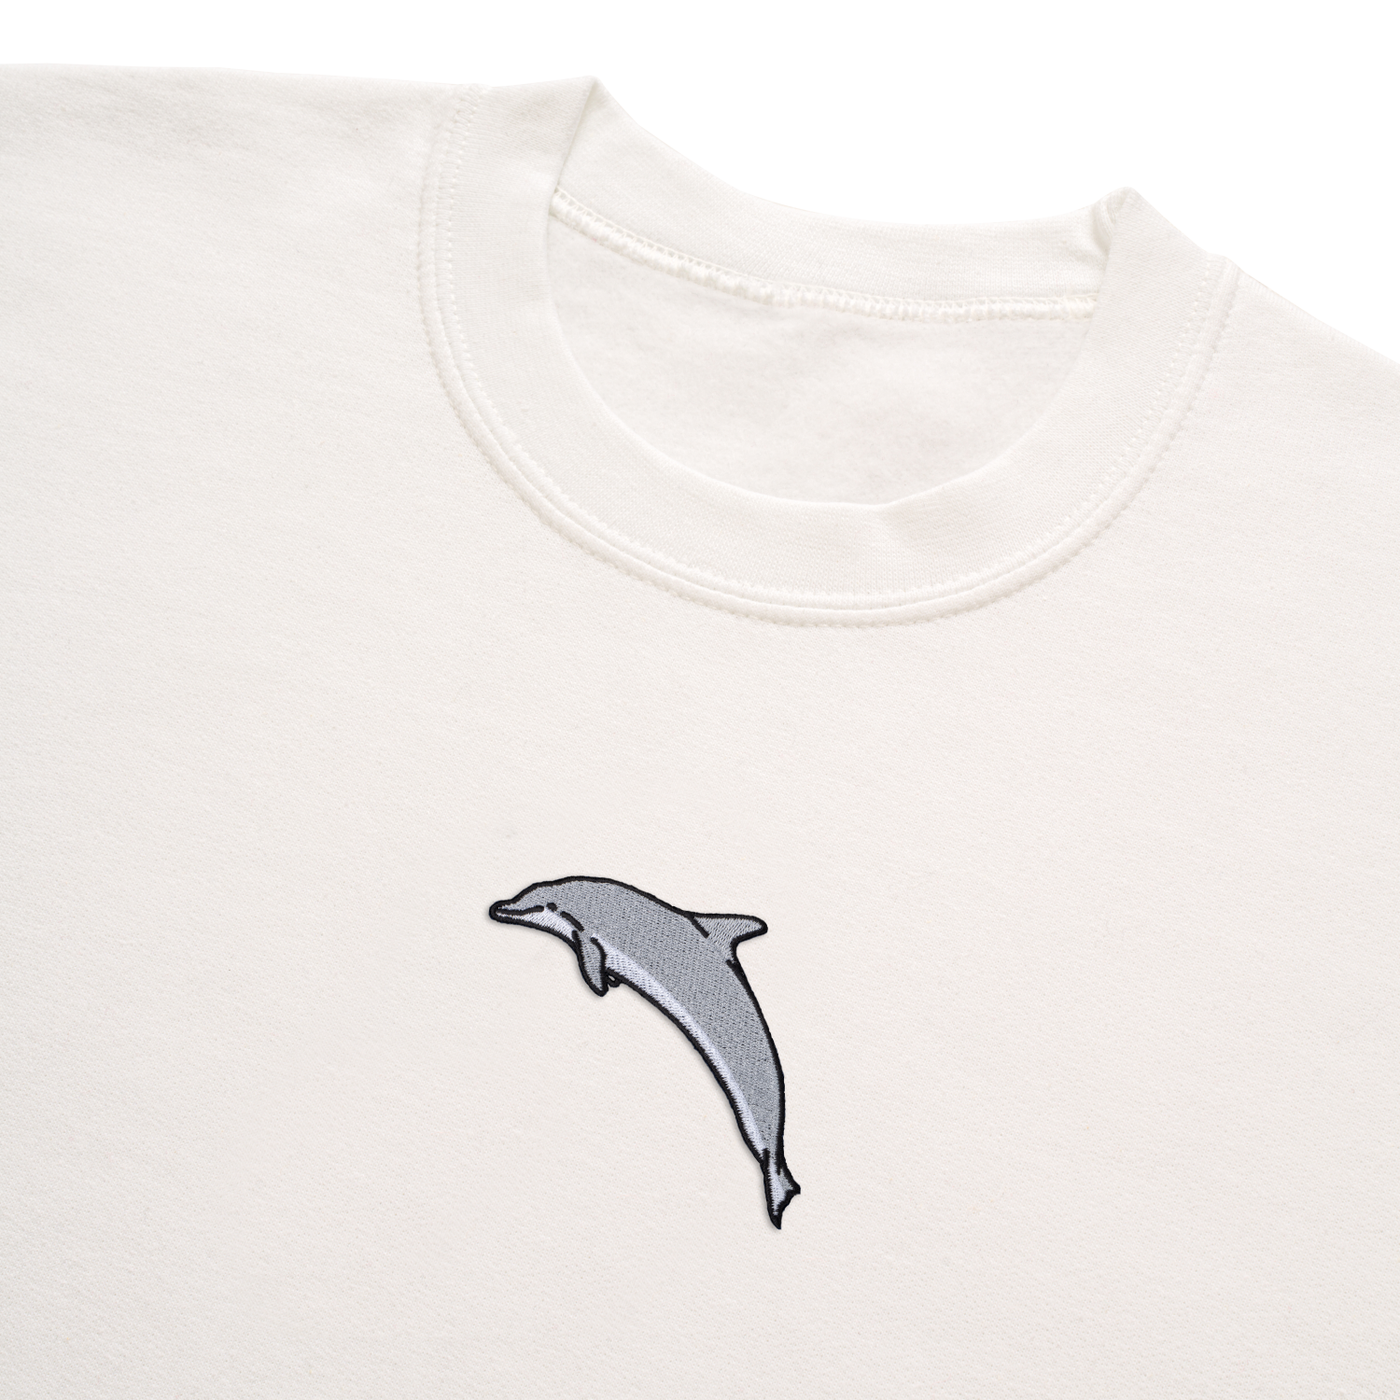 Bobby's Planet Women's Embroidered Dolphin Sweatshirt from Seven Seas Fish Animals Collection in White Color#color_white